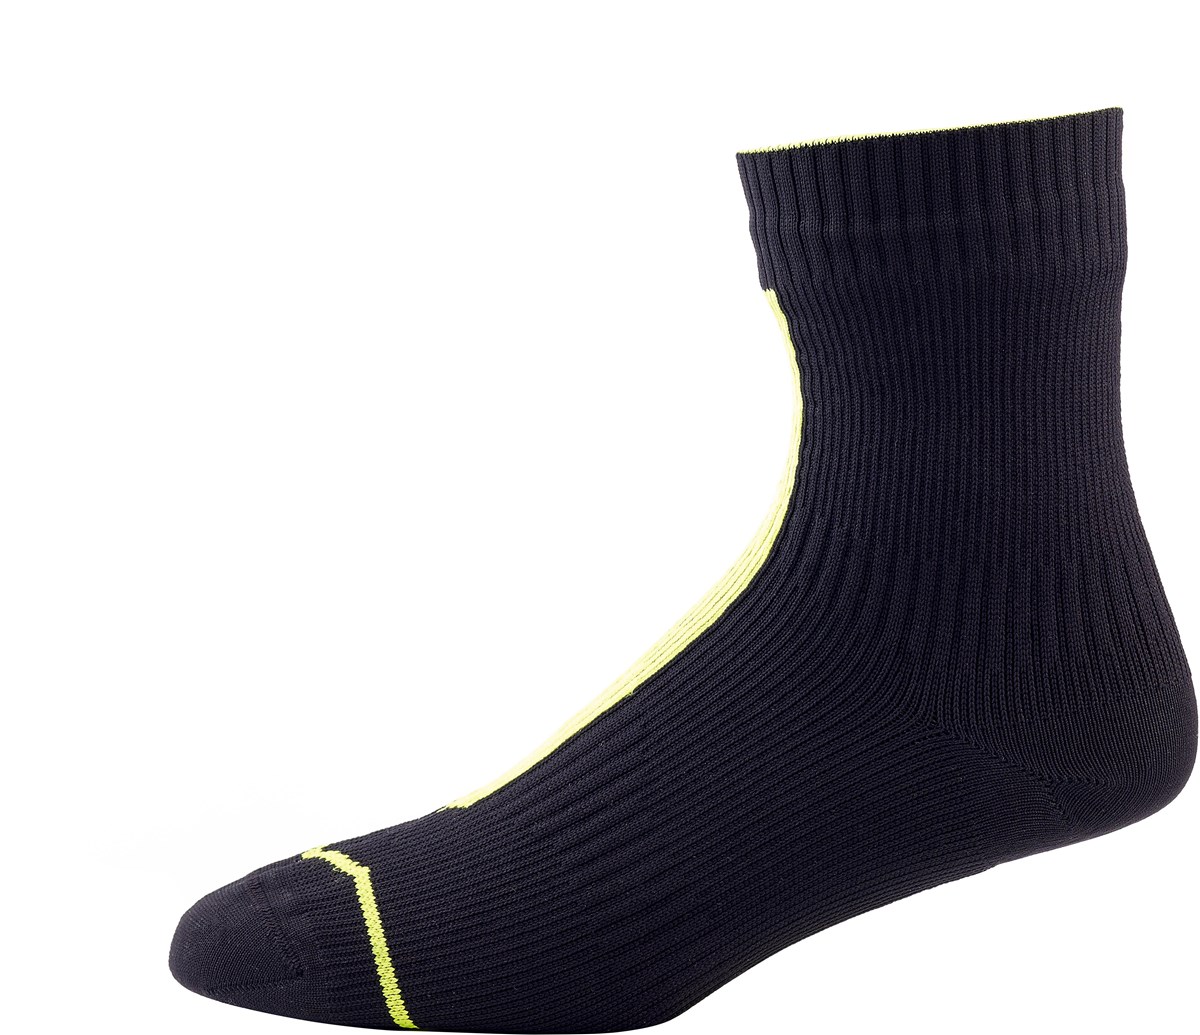 Sealskinz Run Thin Ankle Socks product image